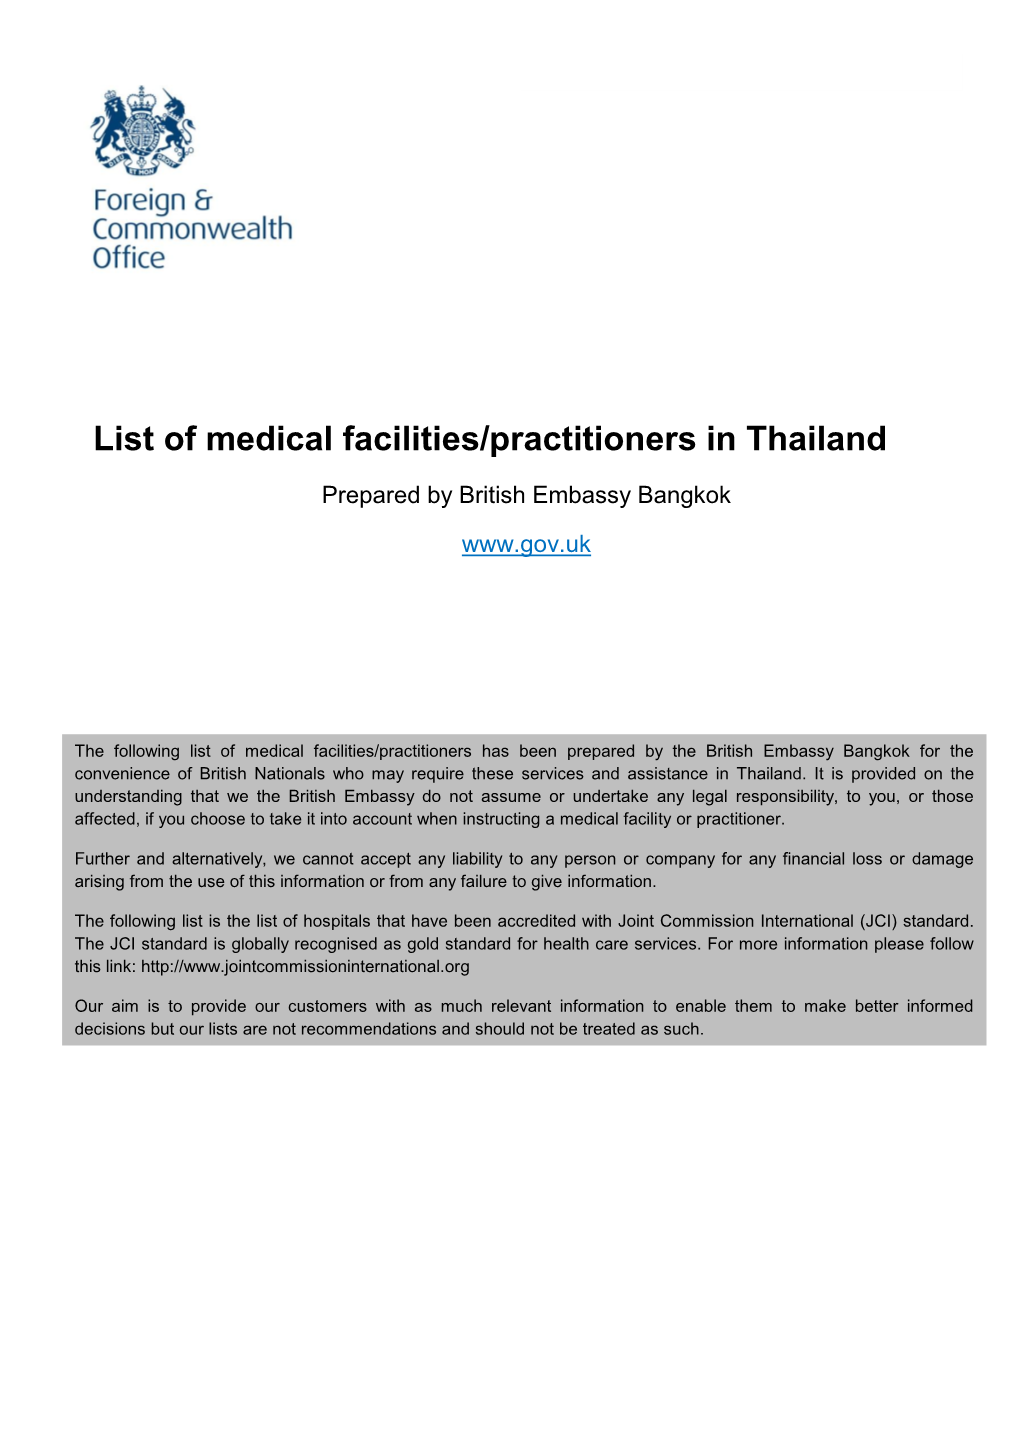 List of Medical Facilities/Practitioners in Thailand